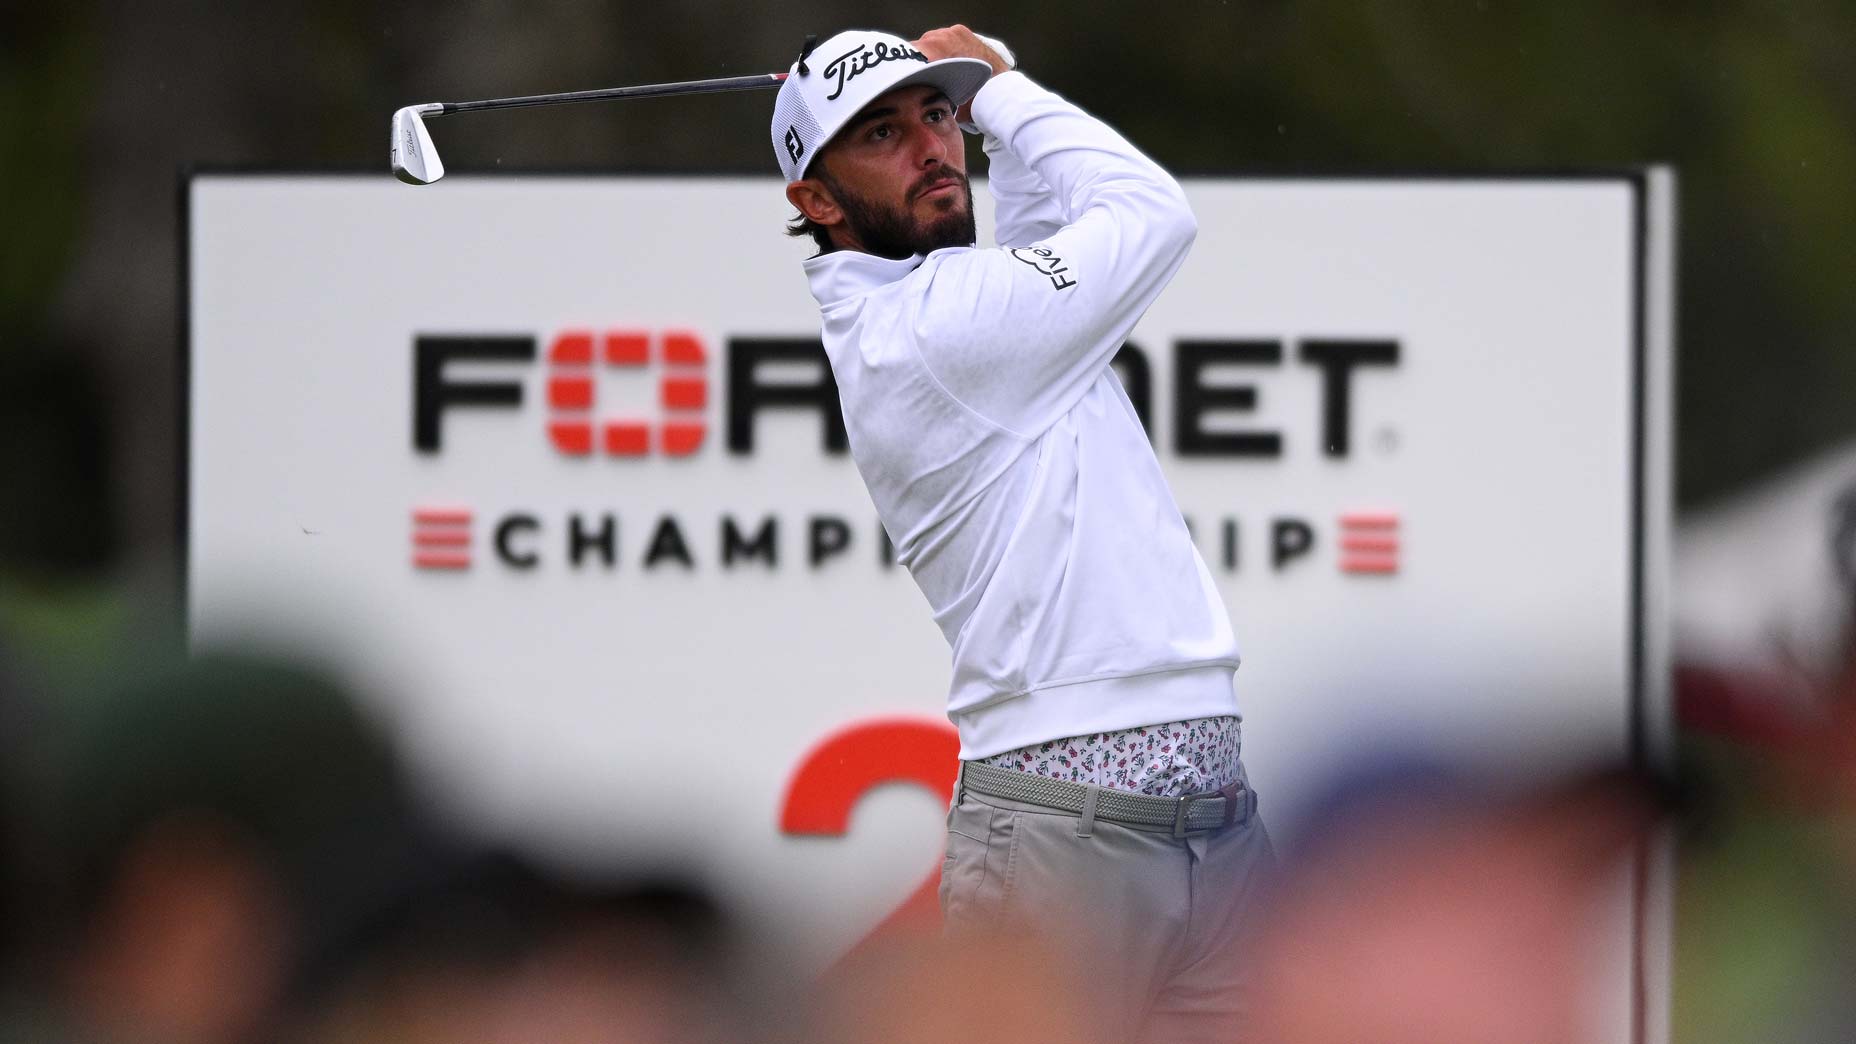 Max Homa of the United States hits his tee shot on the second hole during the final round of the Fortinet Championship at Silverado Resort and Spa North course on September 18, 2022 in Napa, California.